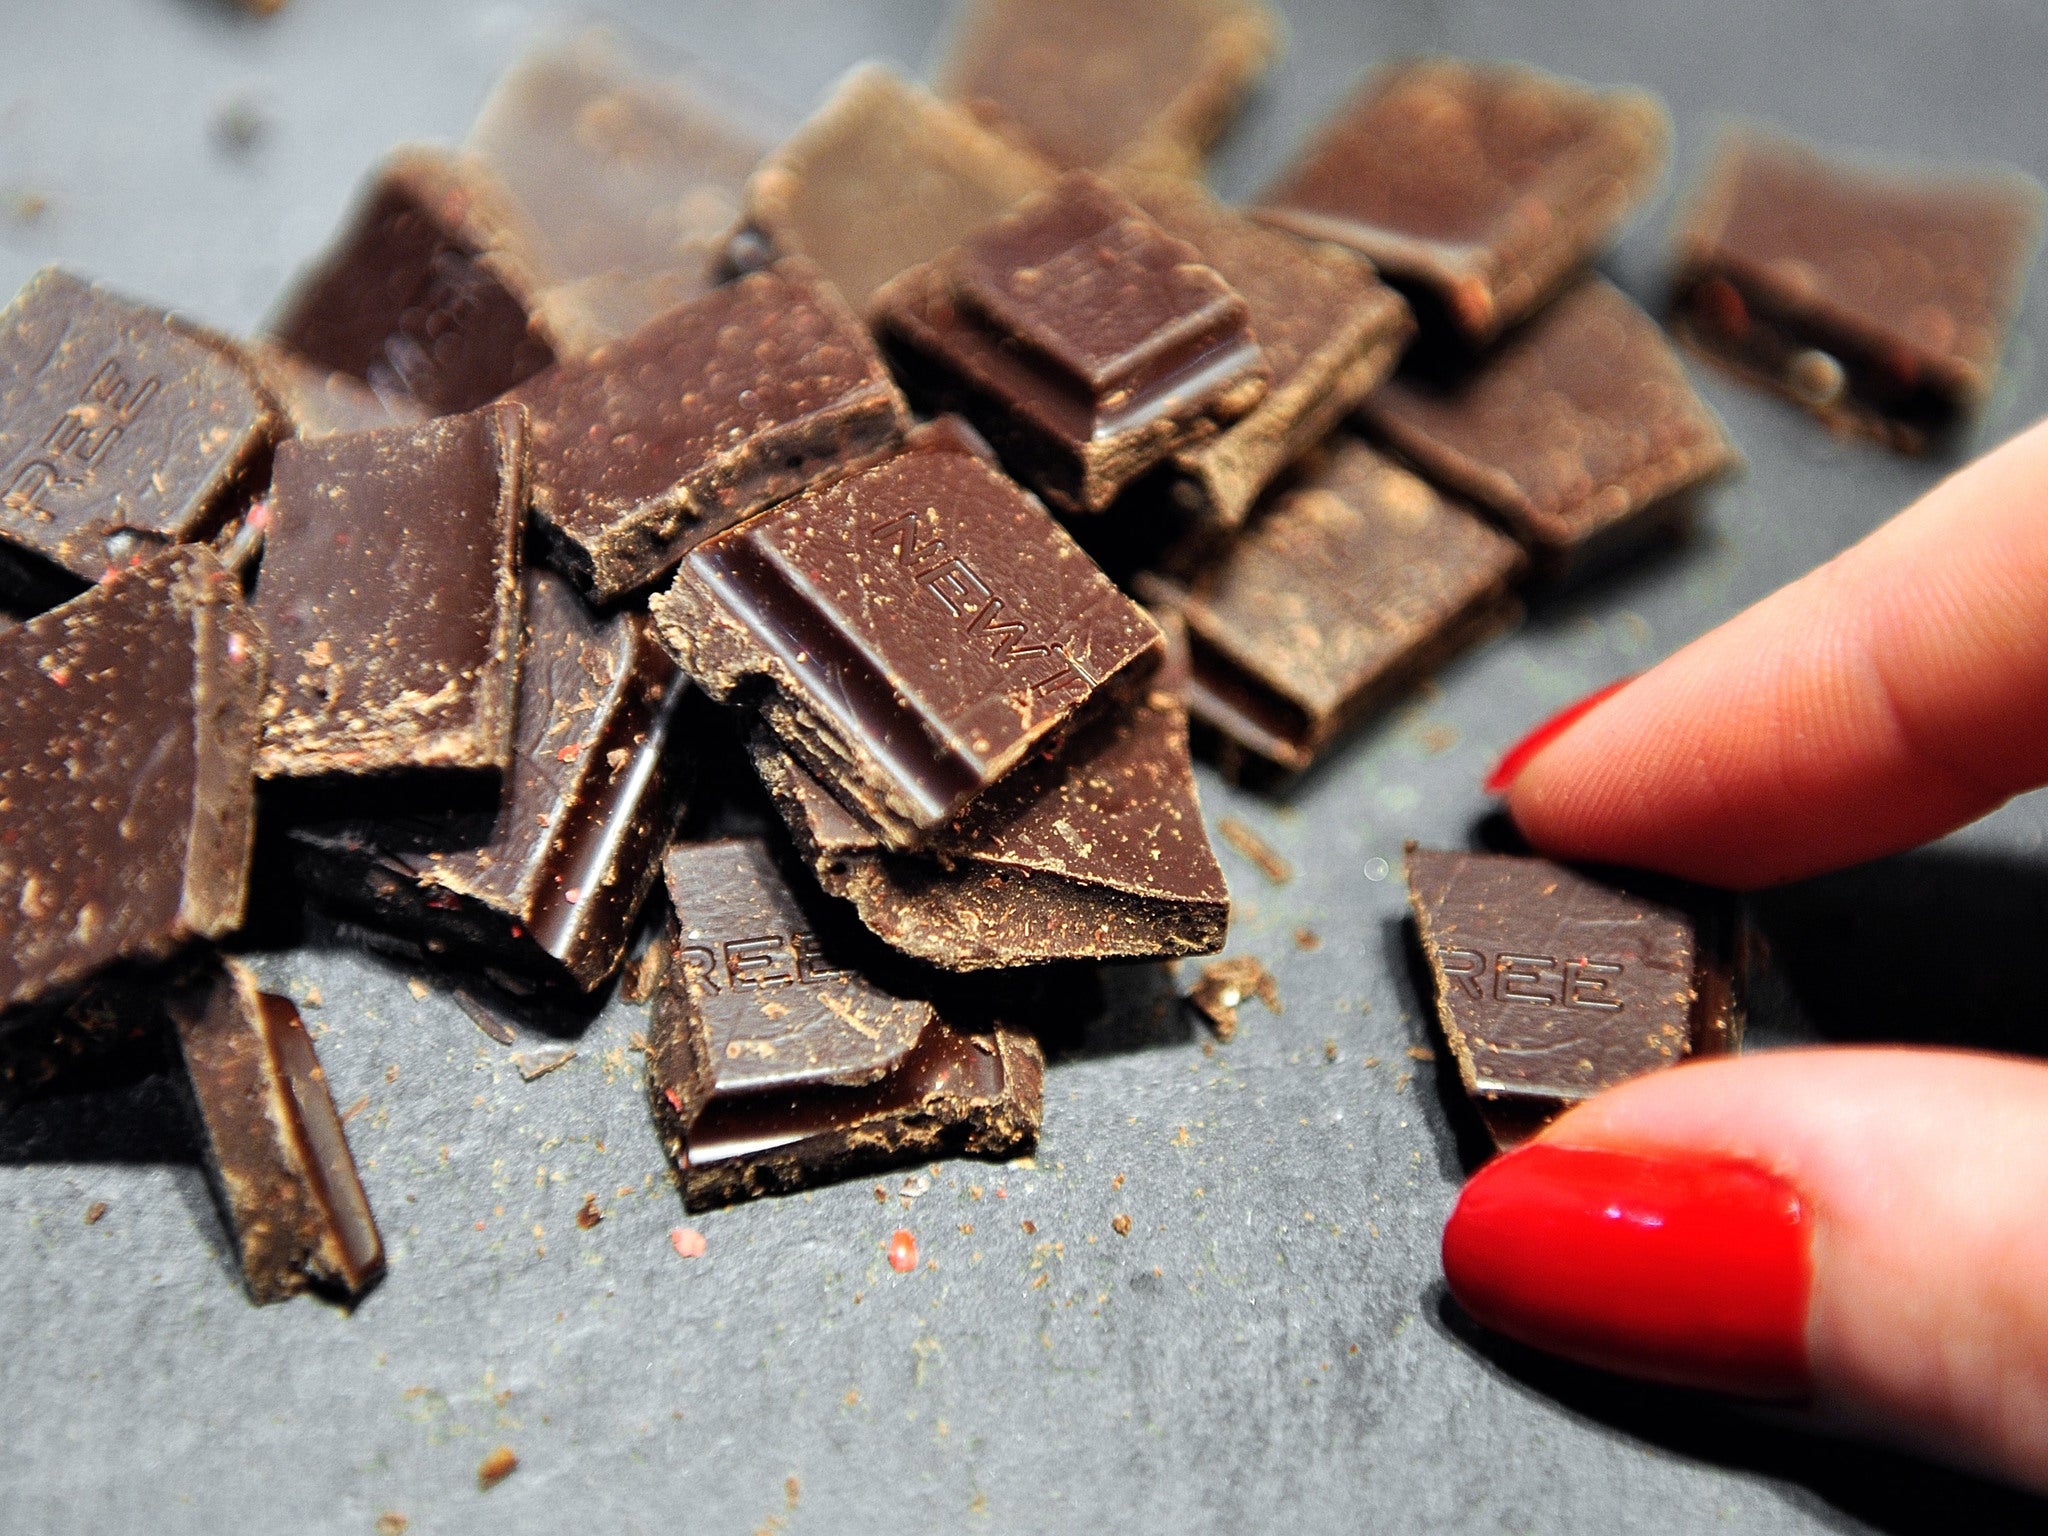 Eating up to 2 bars of chocolate a day lowers risk of heart disease and stroke